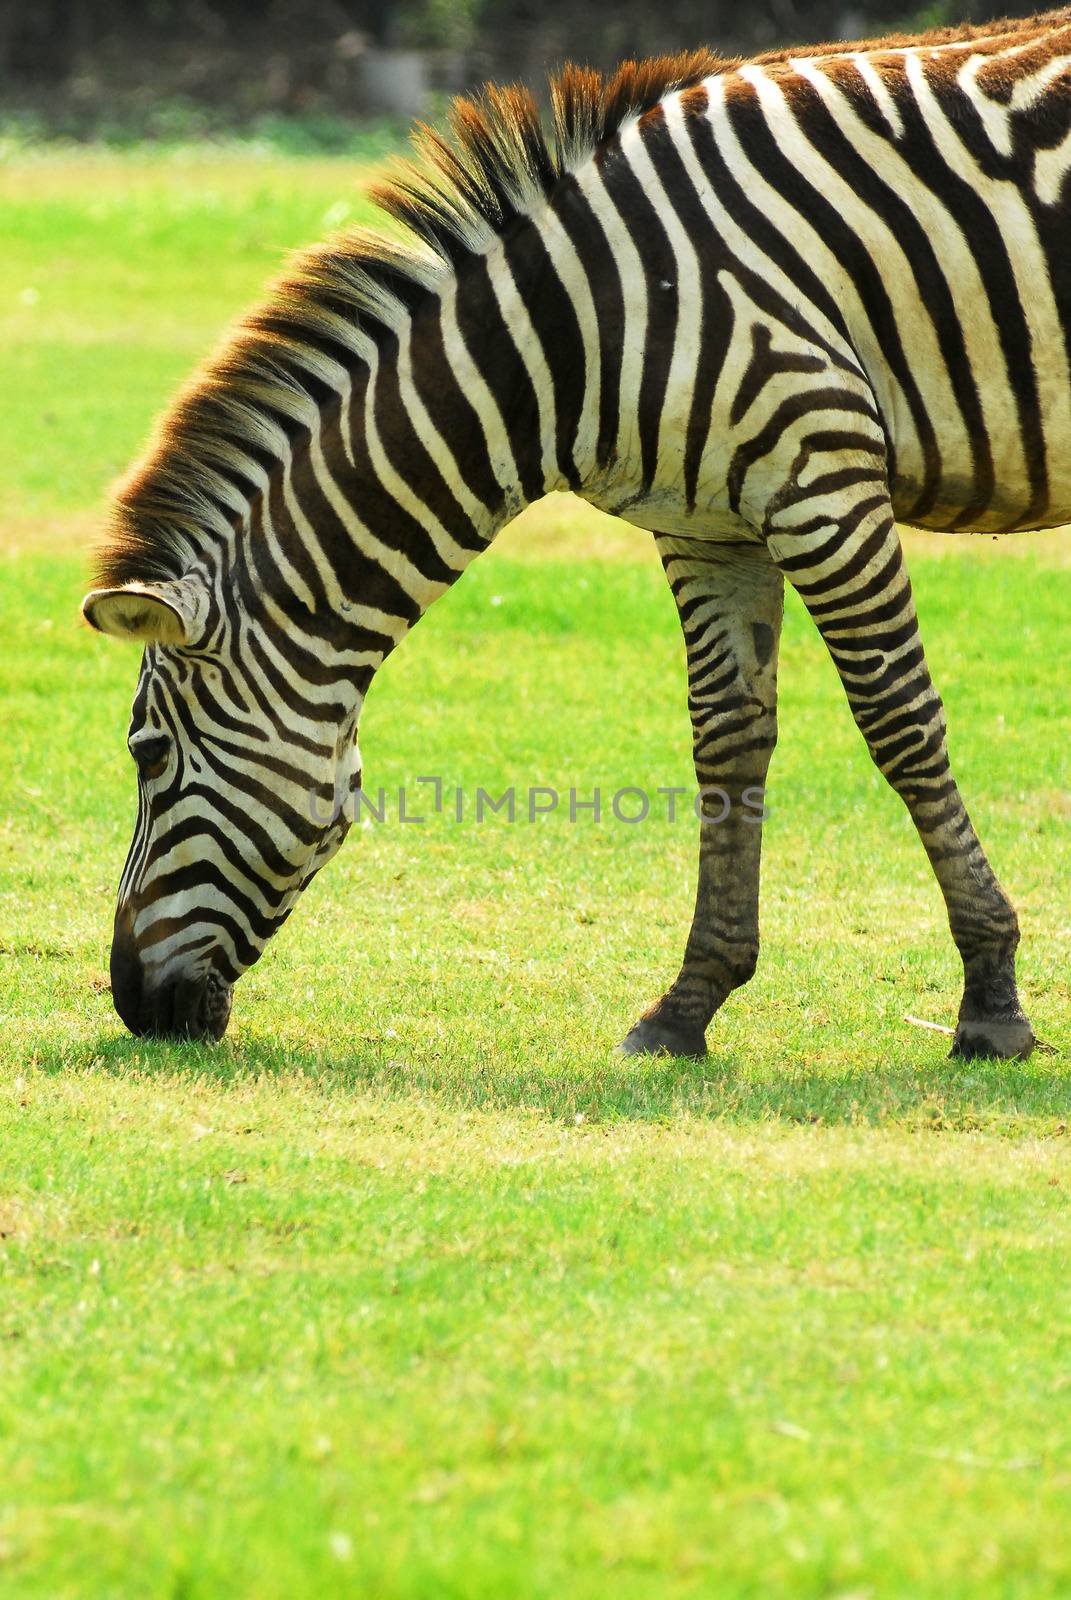 Zebra grazing in a green field by think4photop